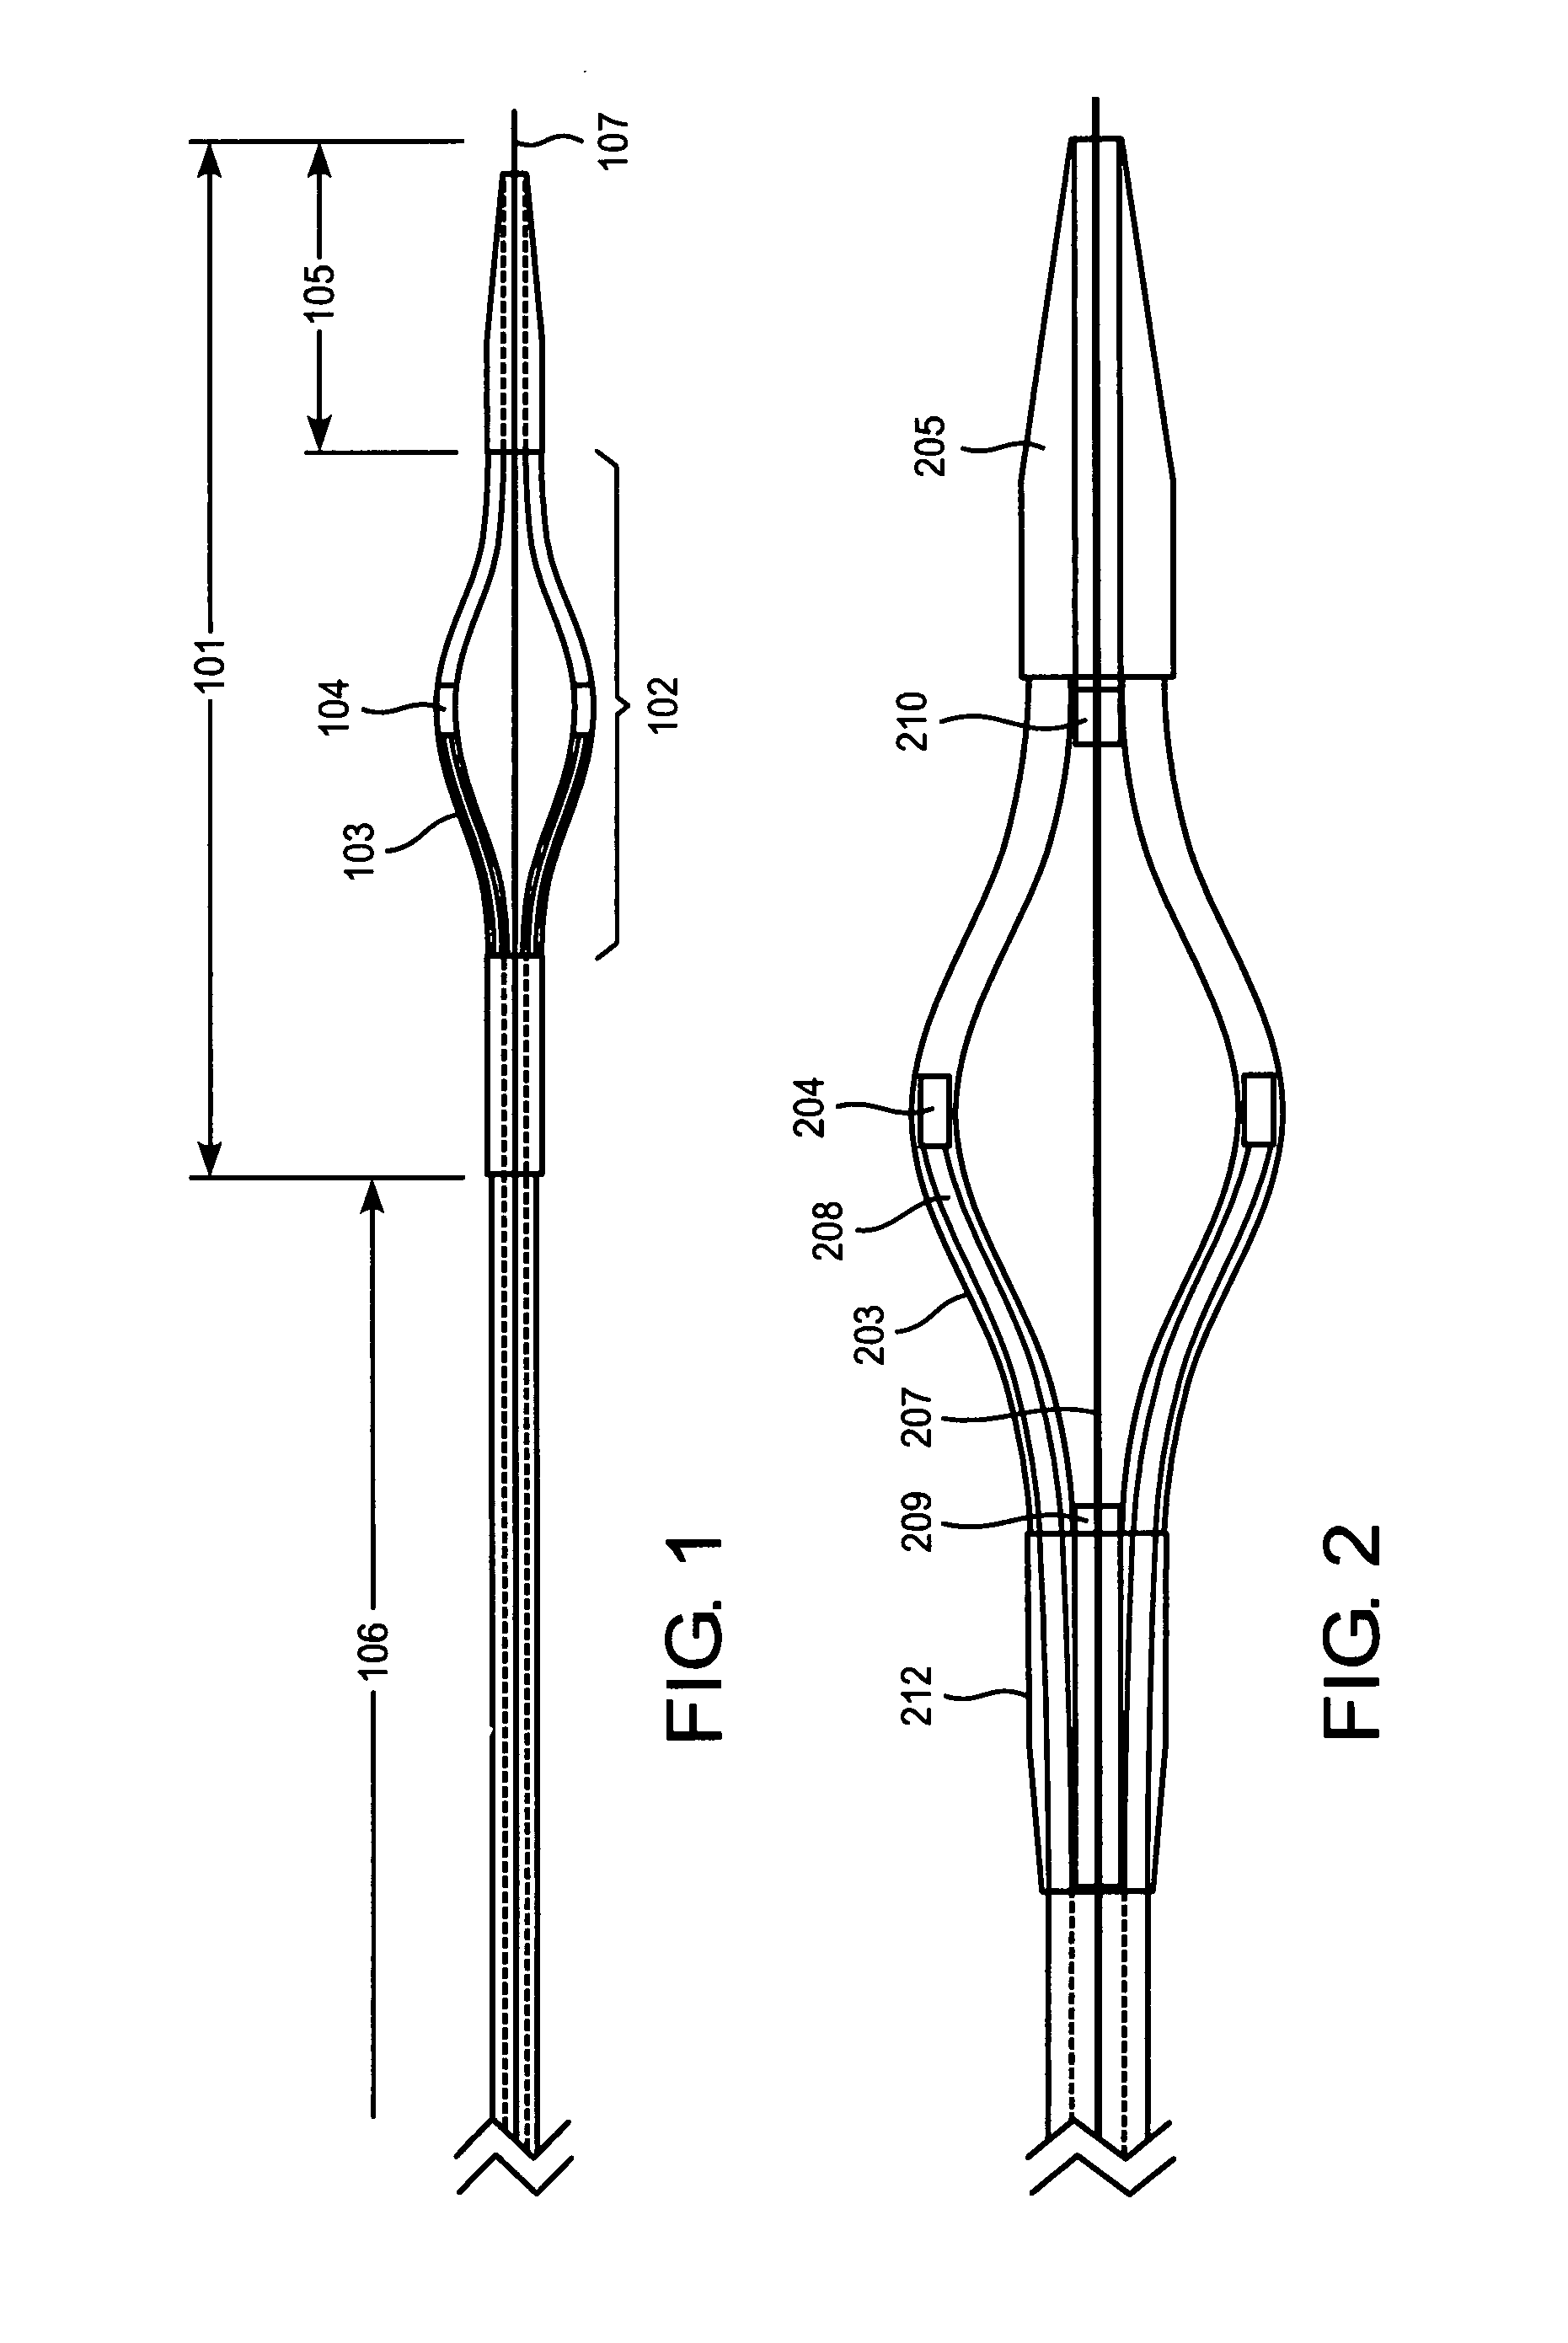 Conformable tissue contact catheter